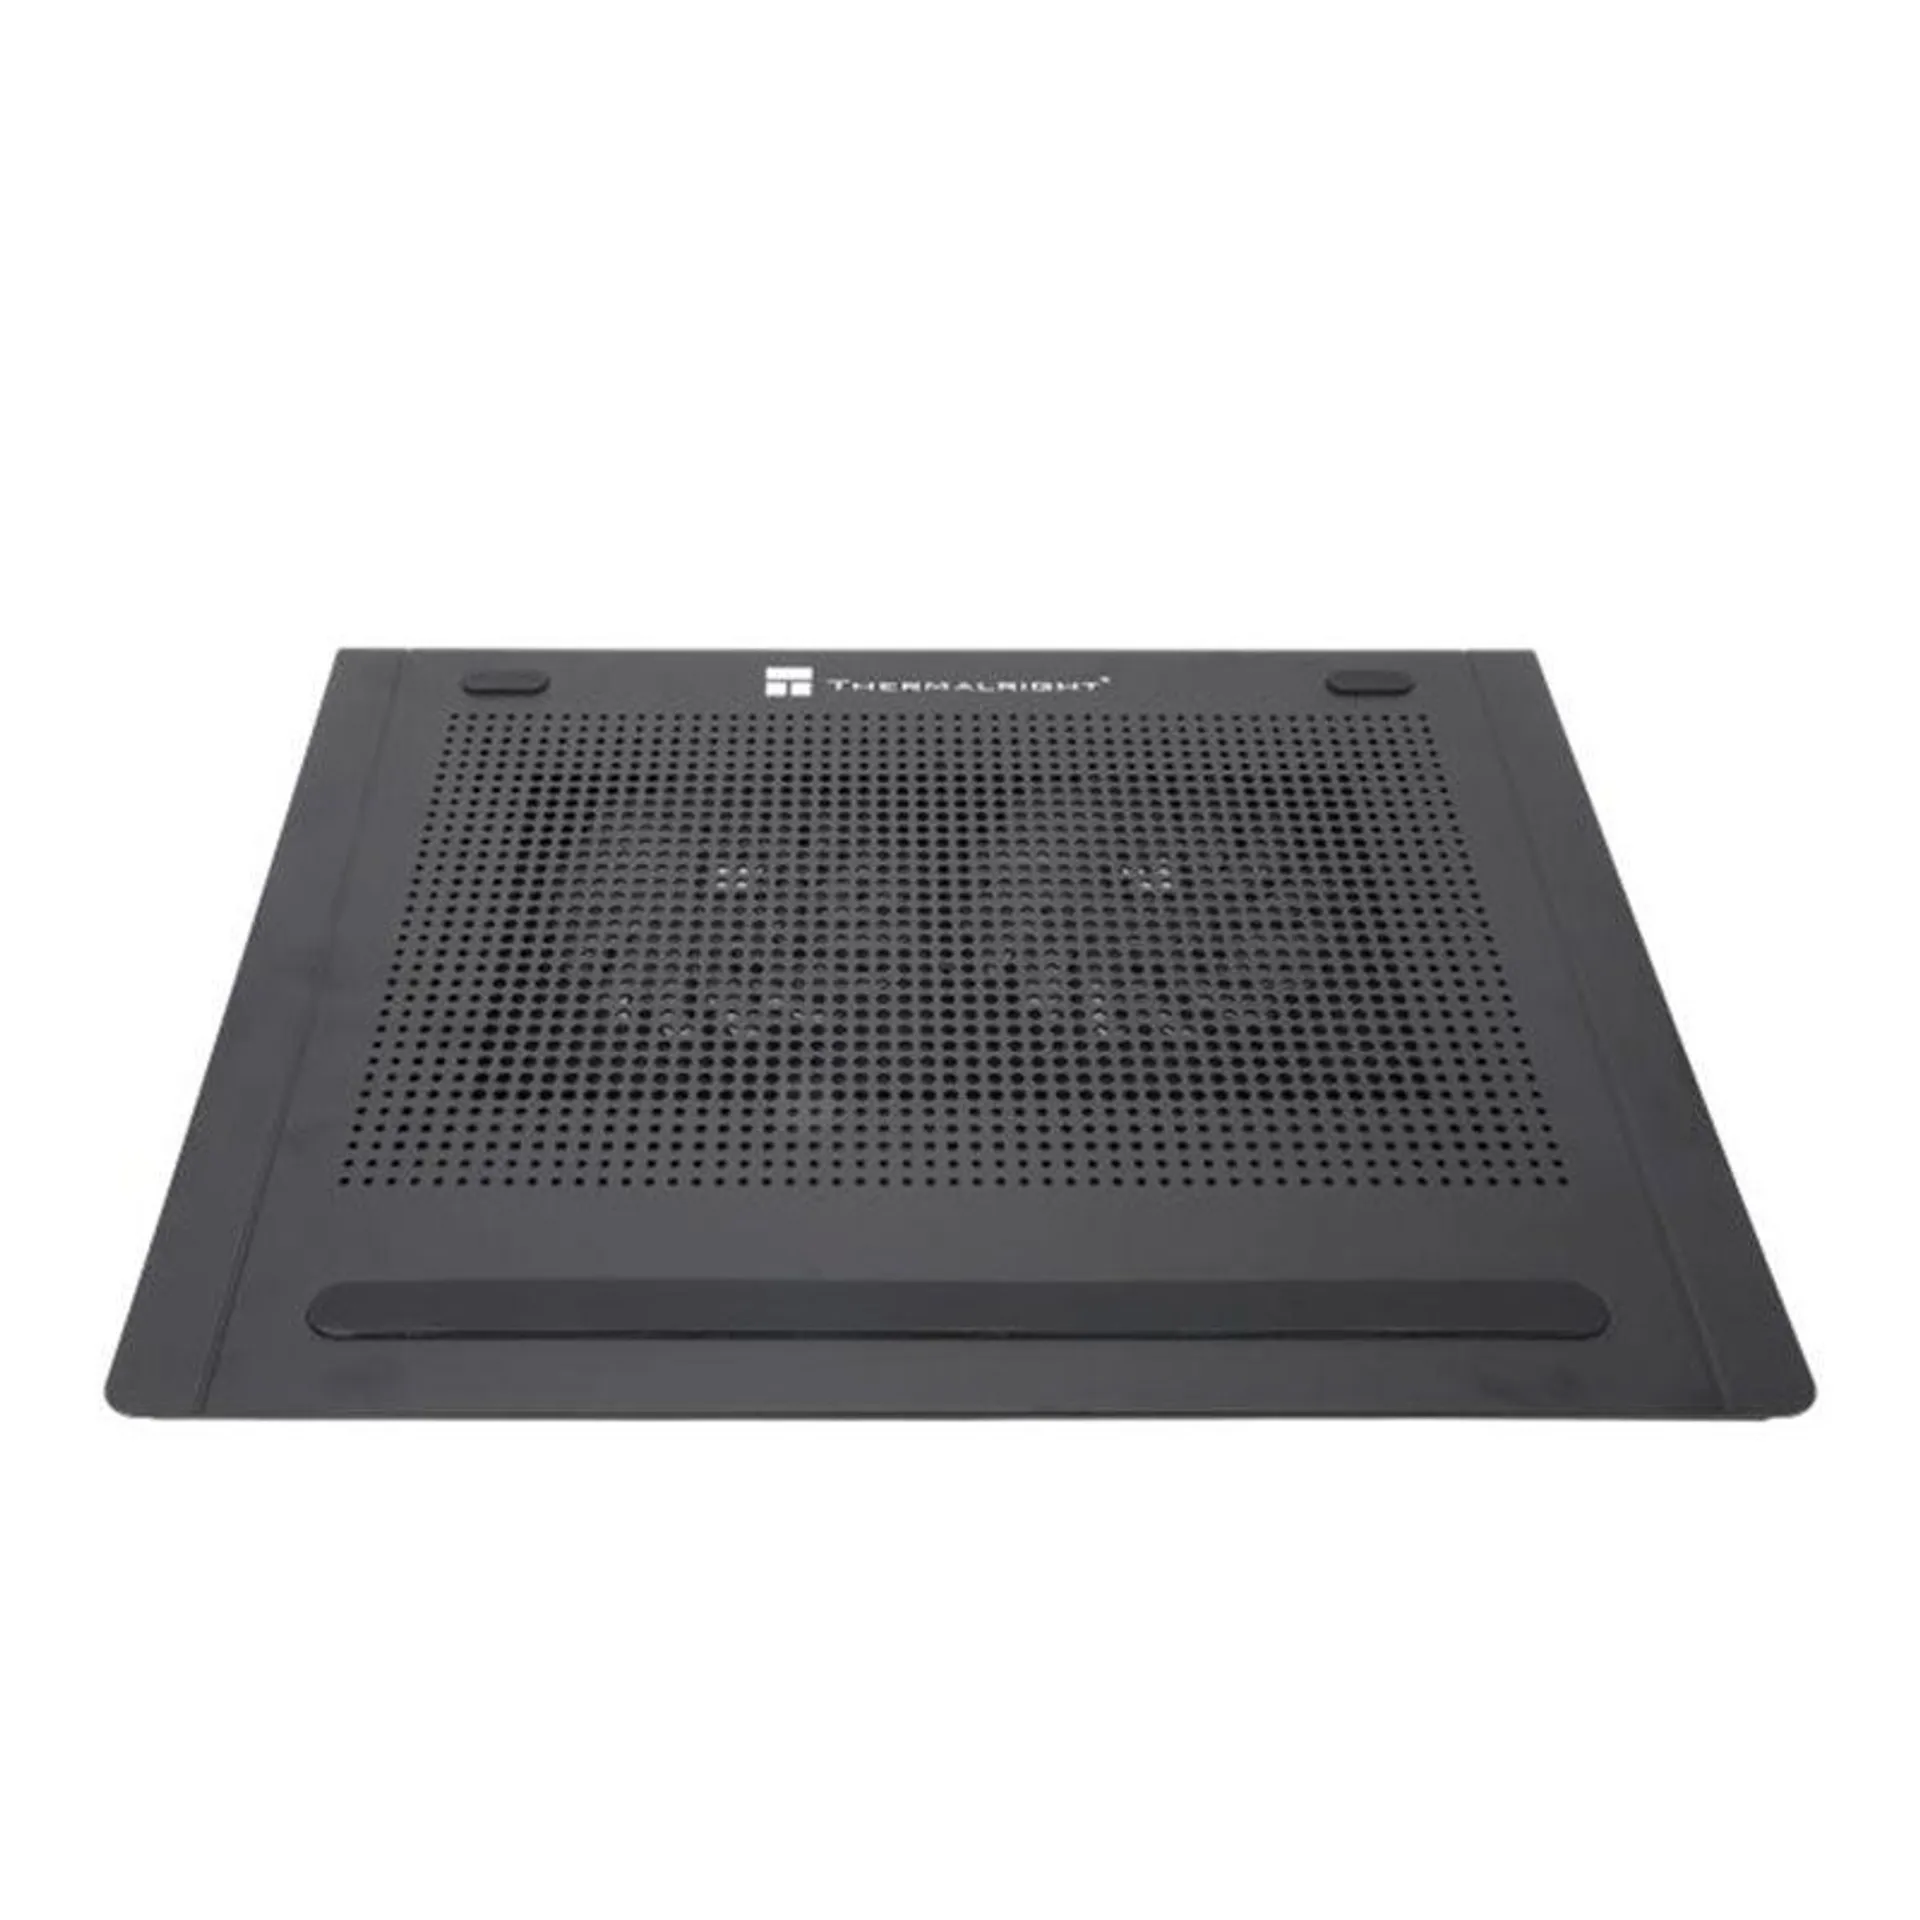 Thermalright Laptop Cooling Pad - Black